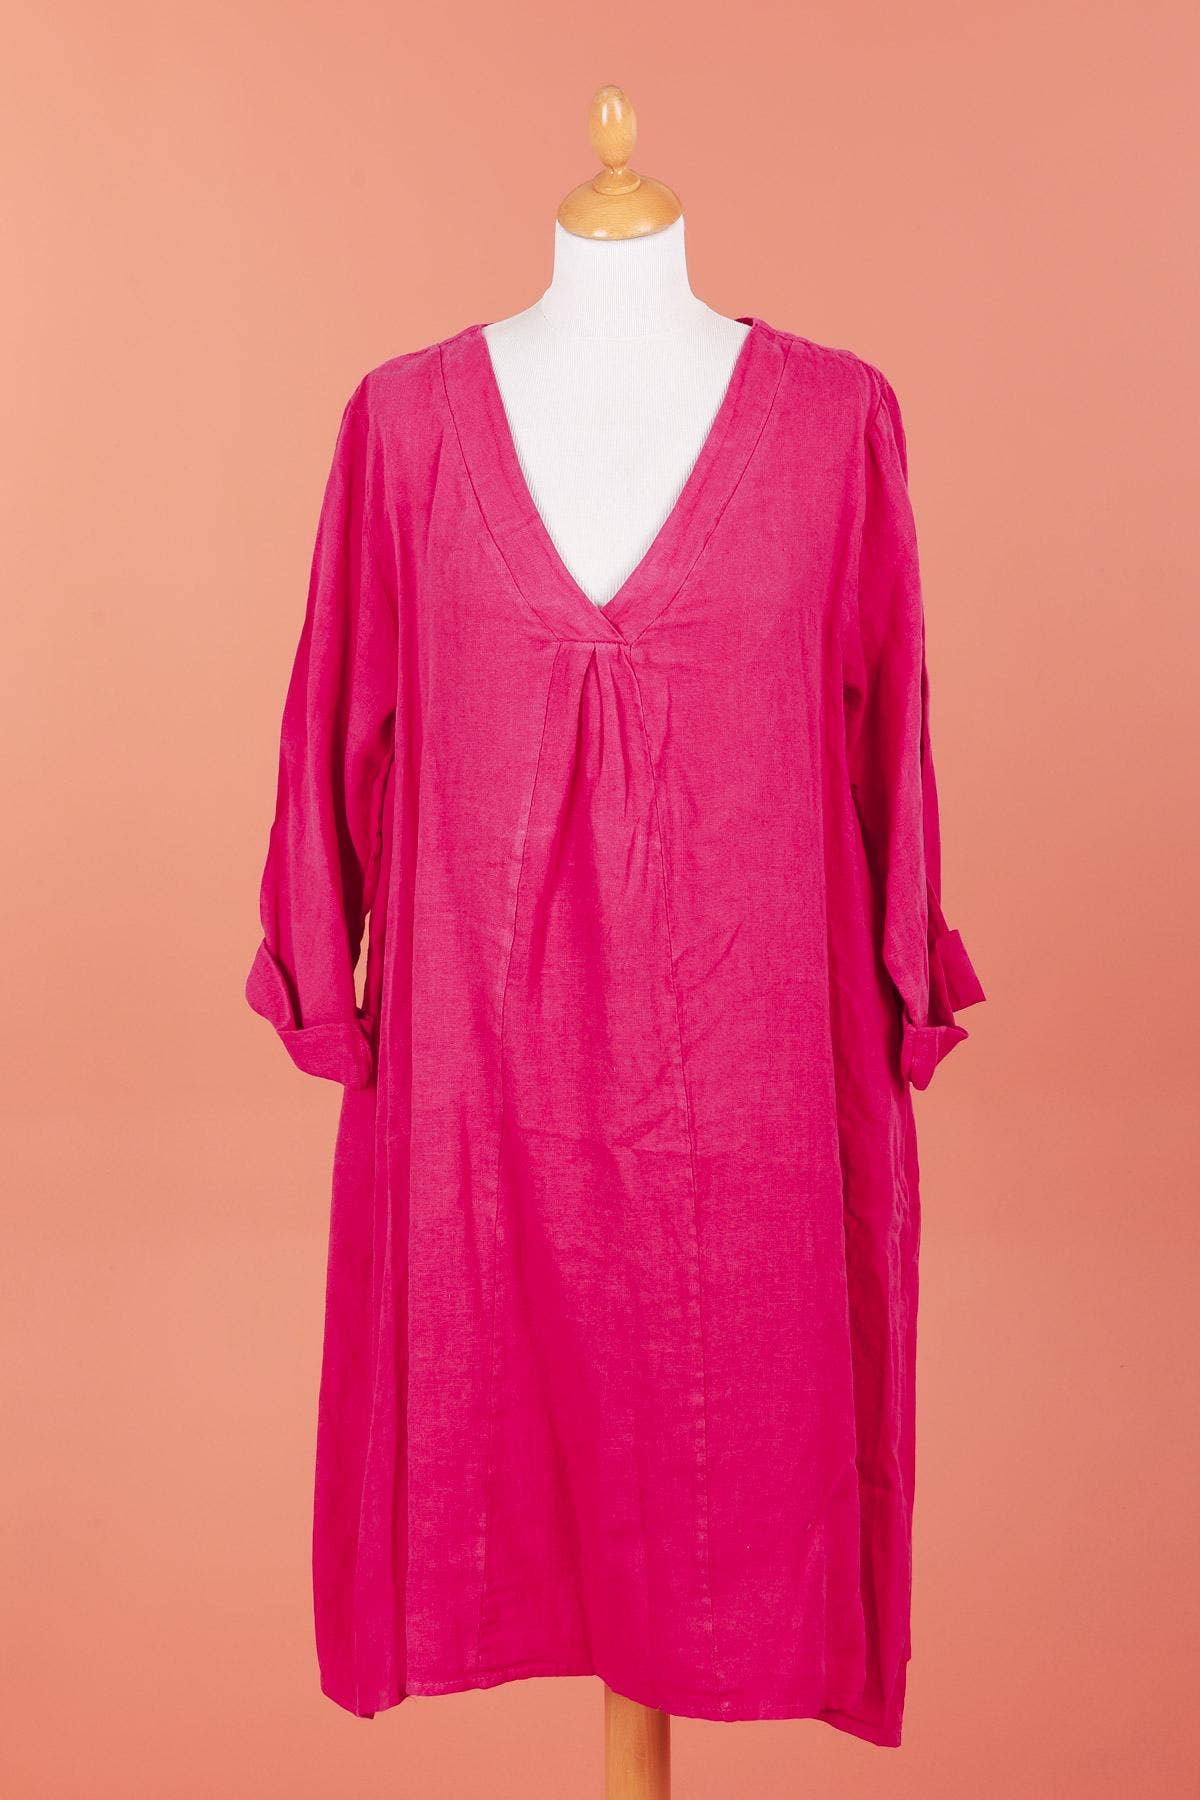 dress 62916 100% linen made in Italy